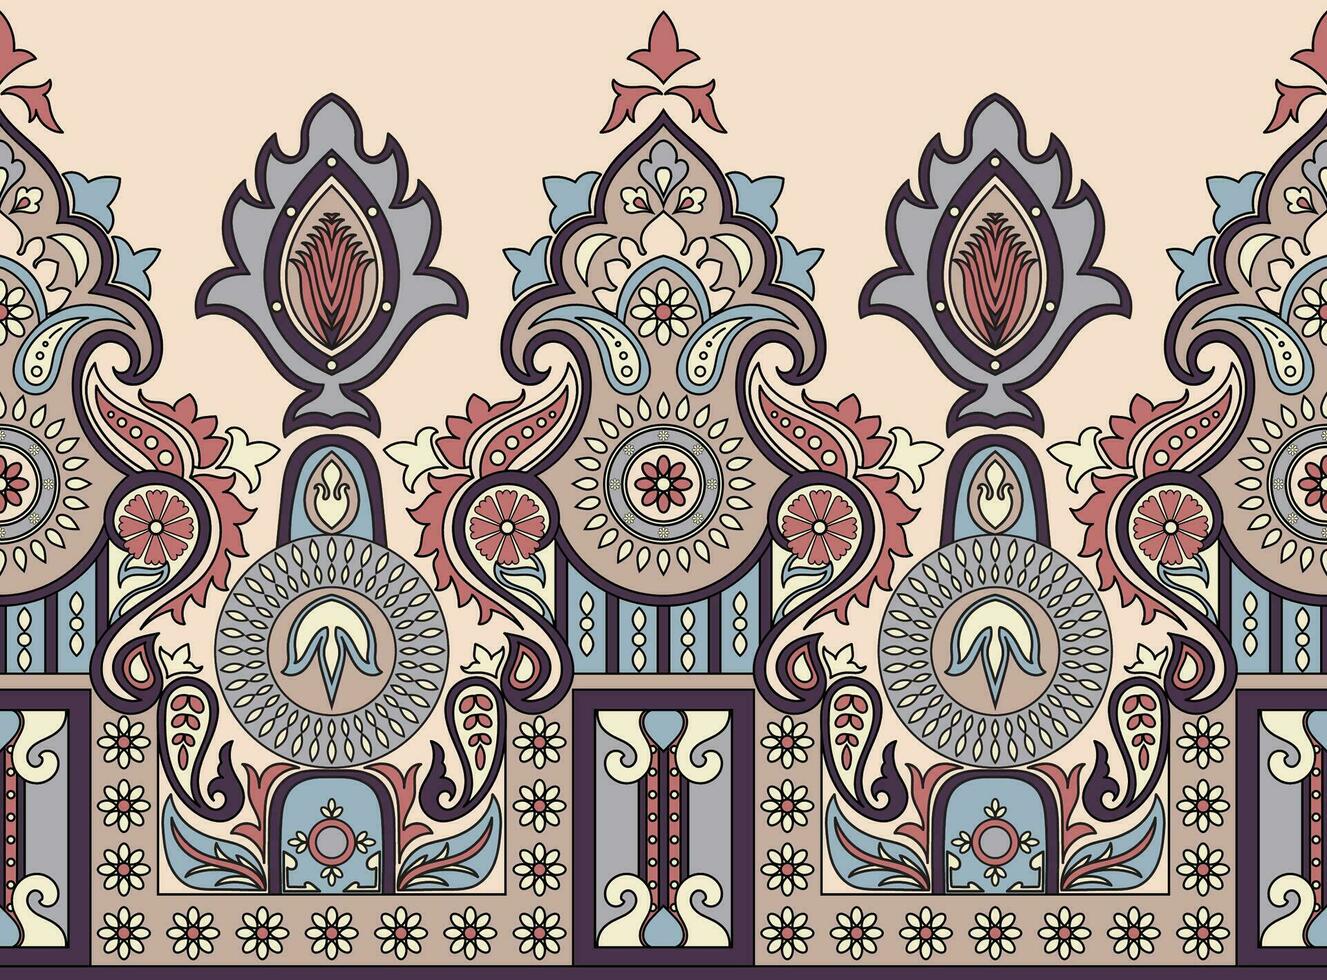 Abstract border. original vintage pattern Ethnic tribes. Seamless. Hand drawn quilling flowers. Carpet Borders, Woven Fabrics, Book Covers vector